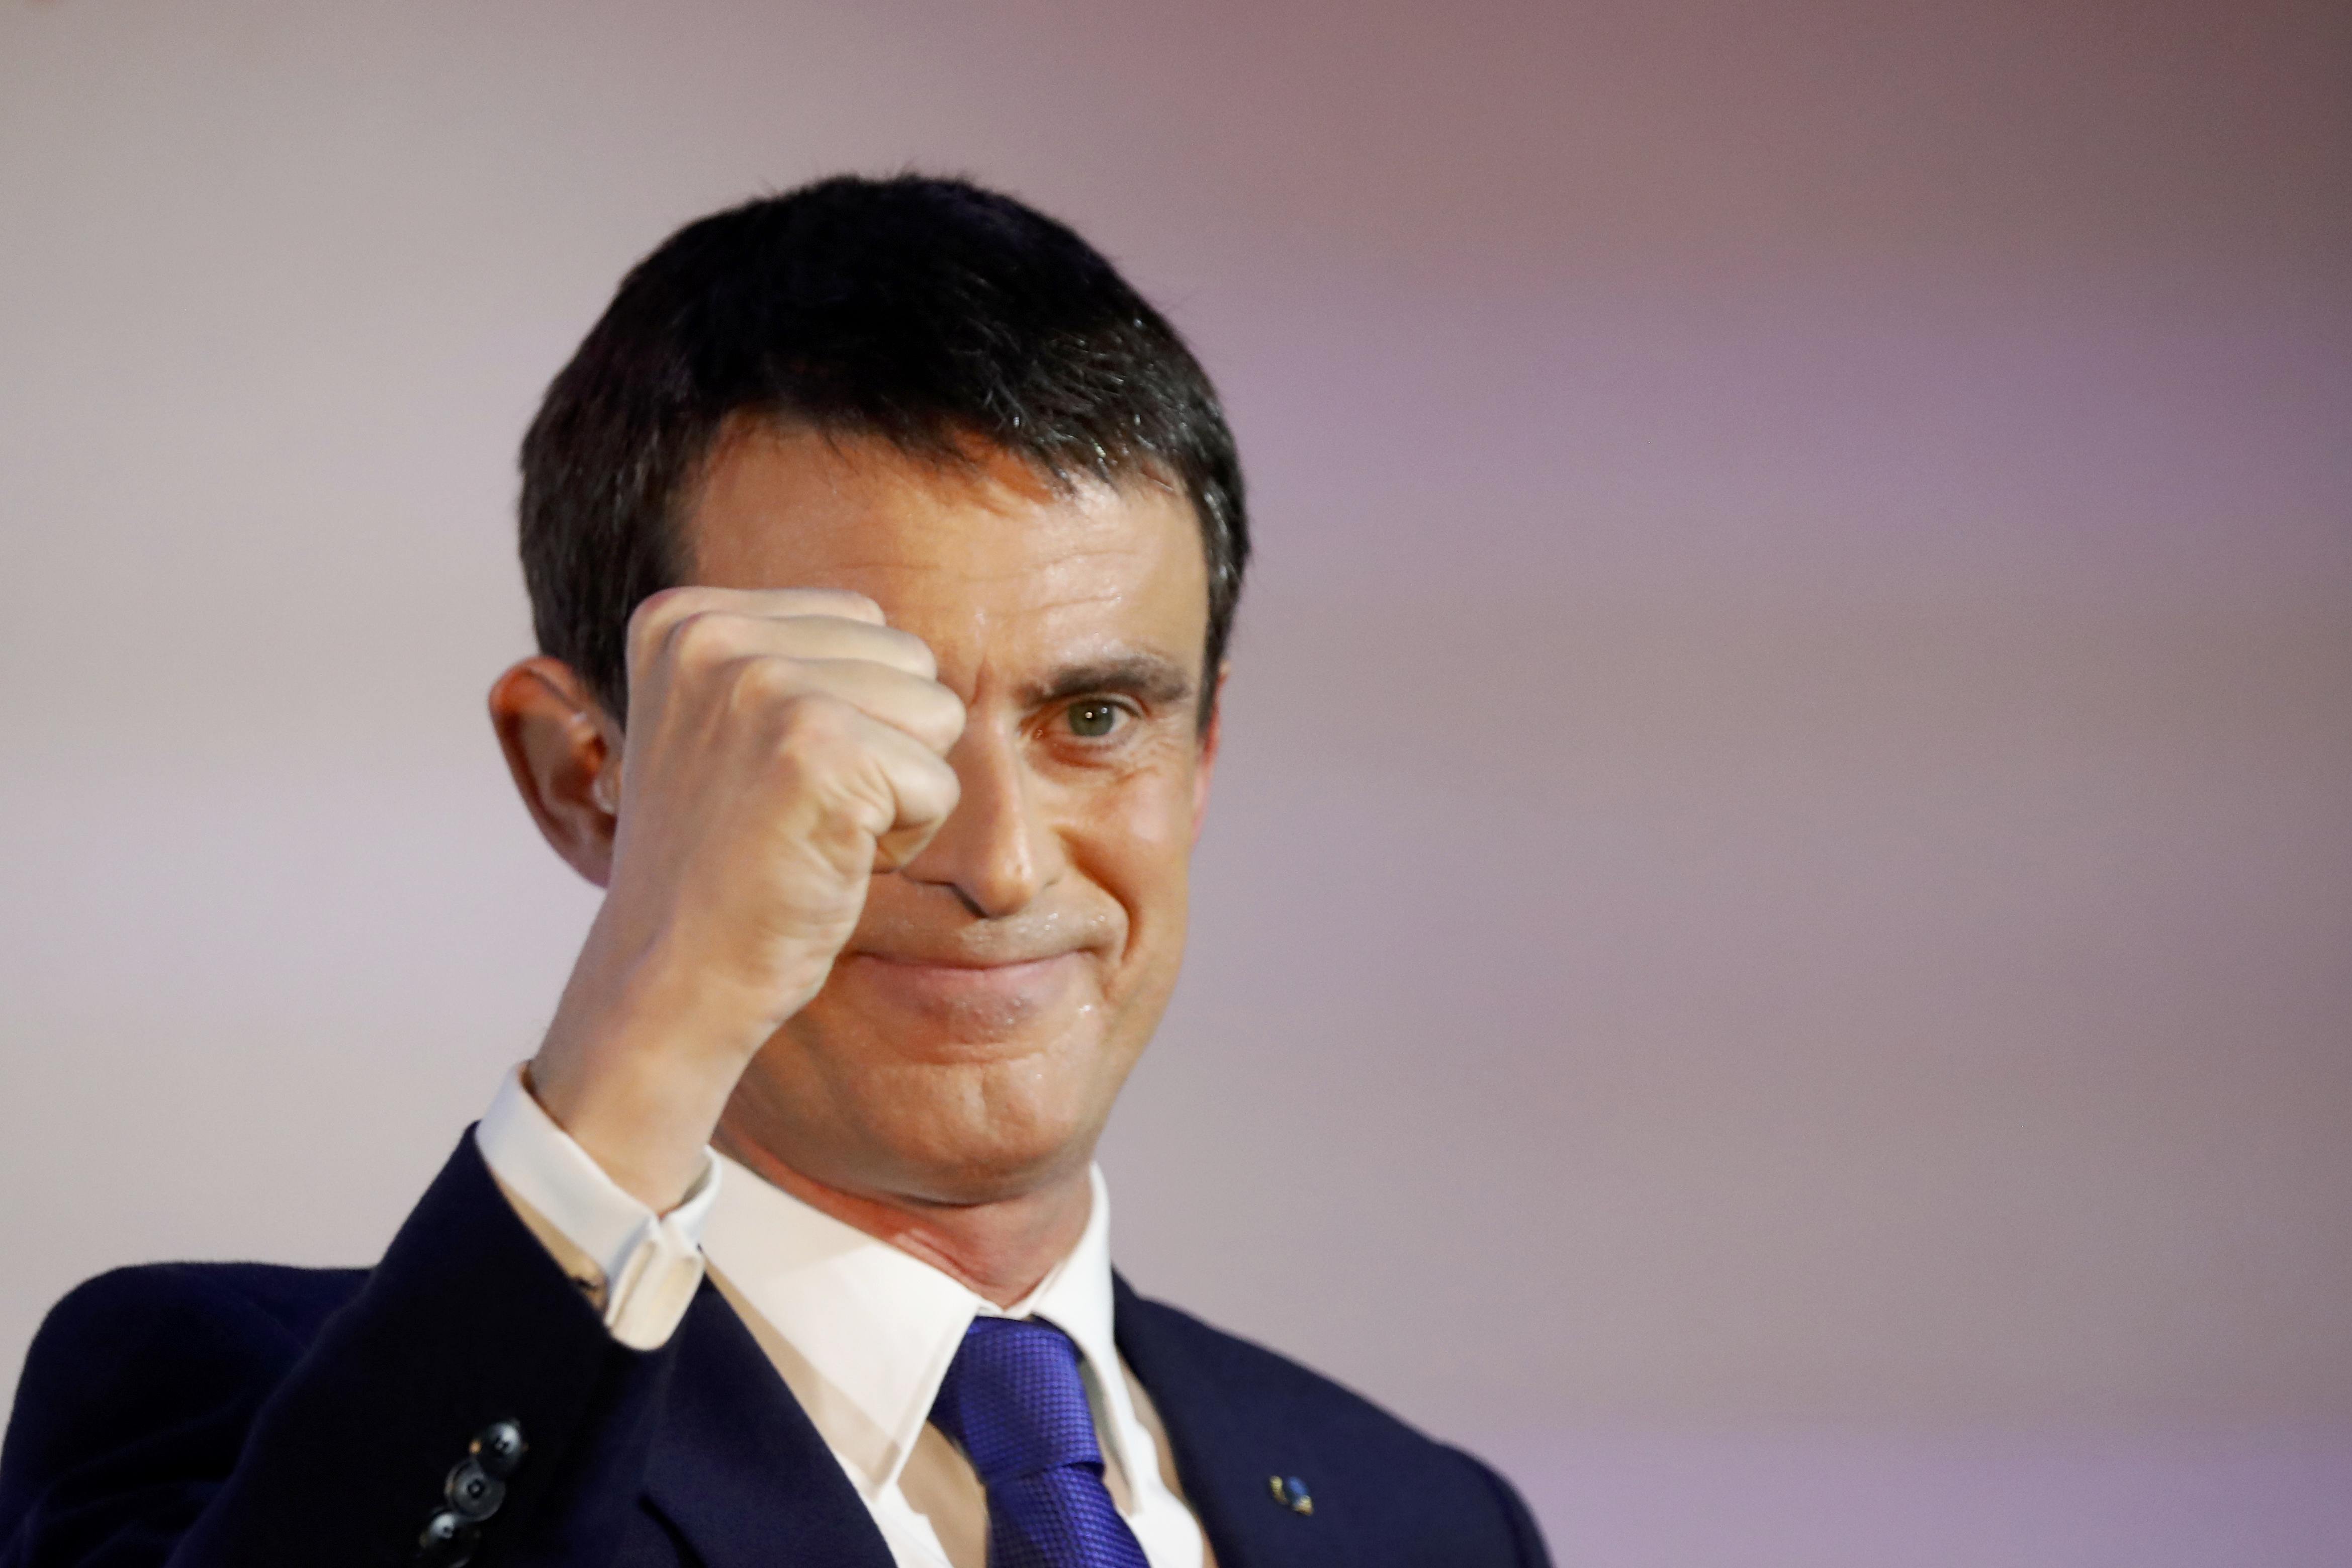 Former French Prime Minister and candidate Manuel Valls reacts after the results in the first round of the French left's presidential primary election in Paris, France, January 22, 2017. REUTERS/Charles Platiau